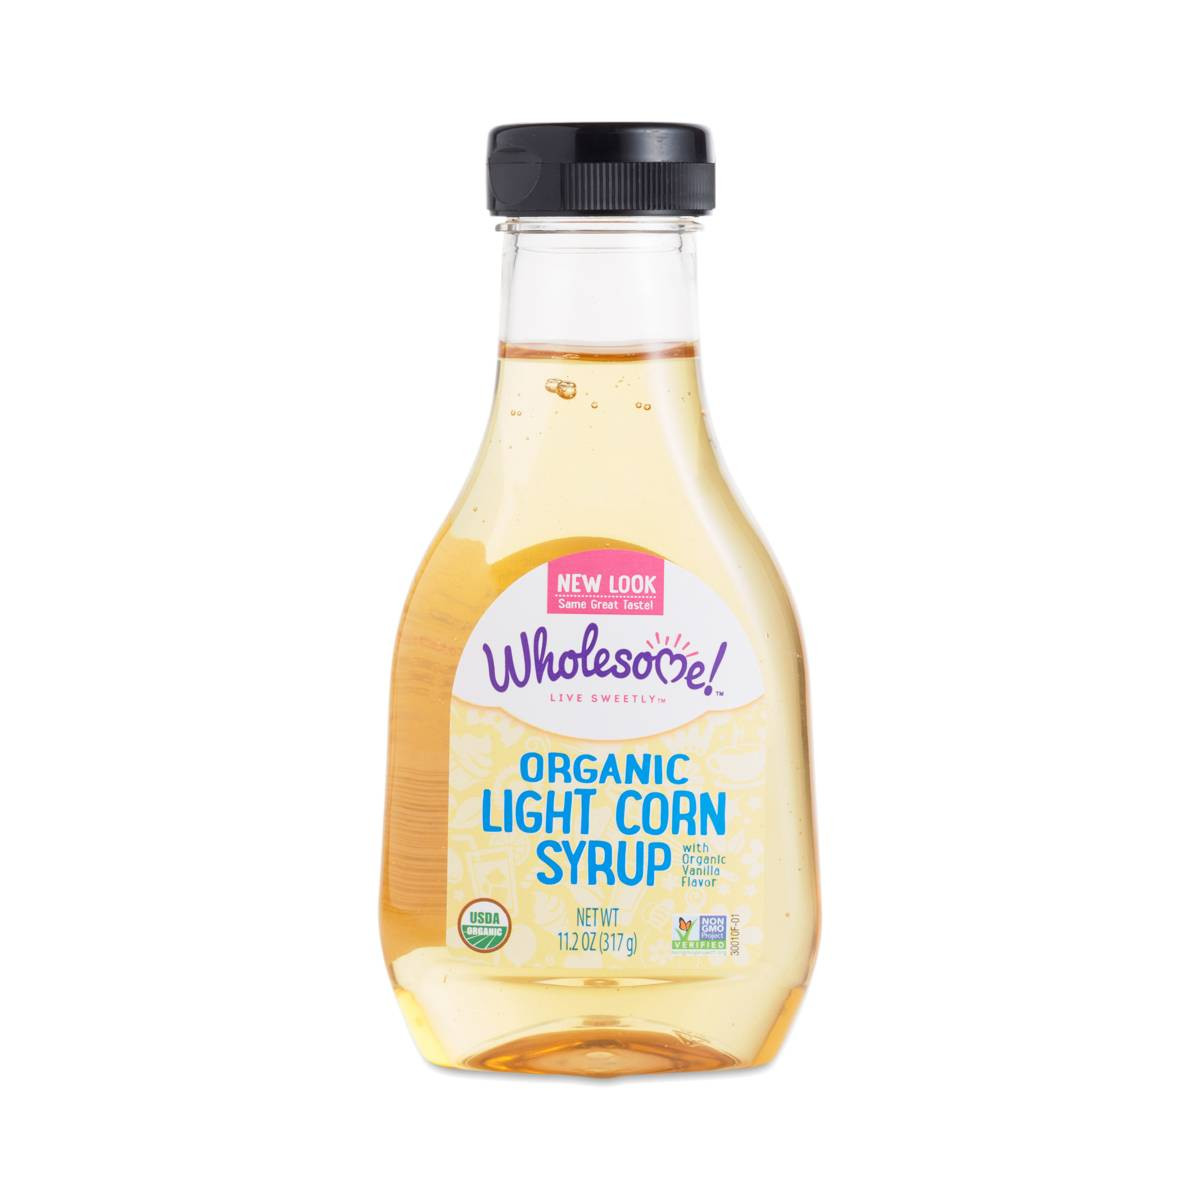 Organic Corn Syrup
 Organic Light Corn Syrup by Wholesome Thrive Market